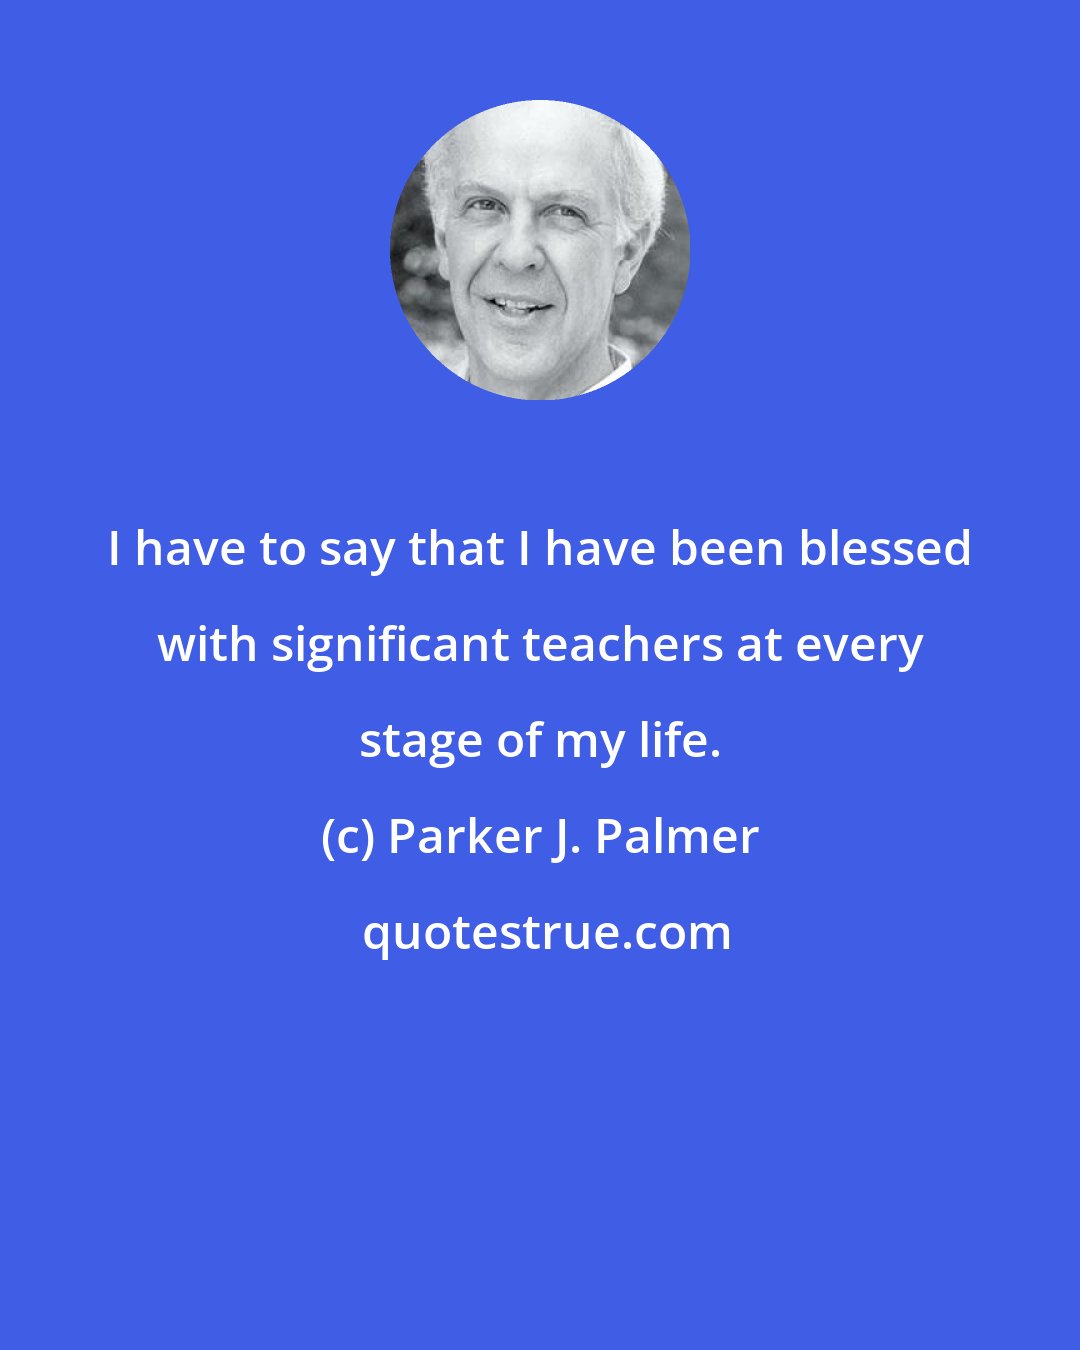 Parker J. Palmer: I have to say that I have been blessed with significant teachers at every stage of my life.